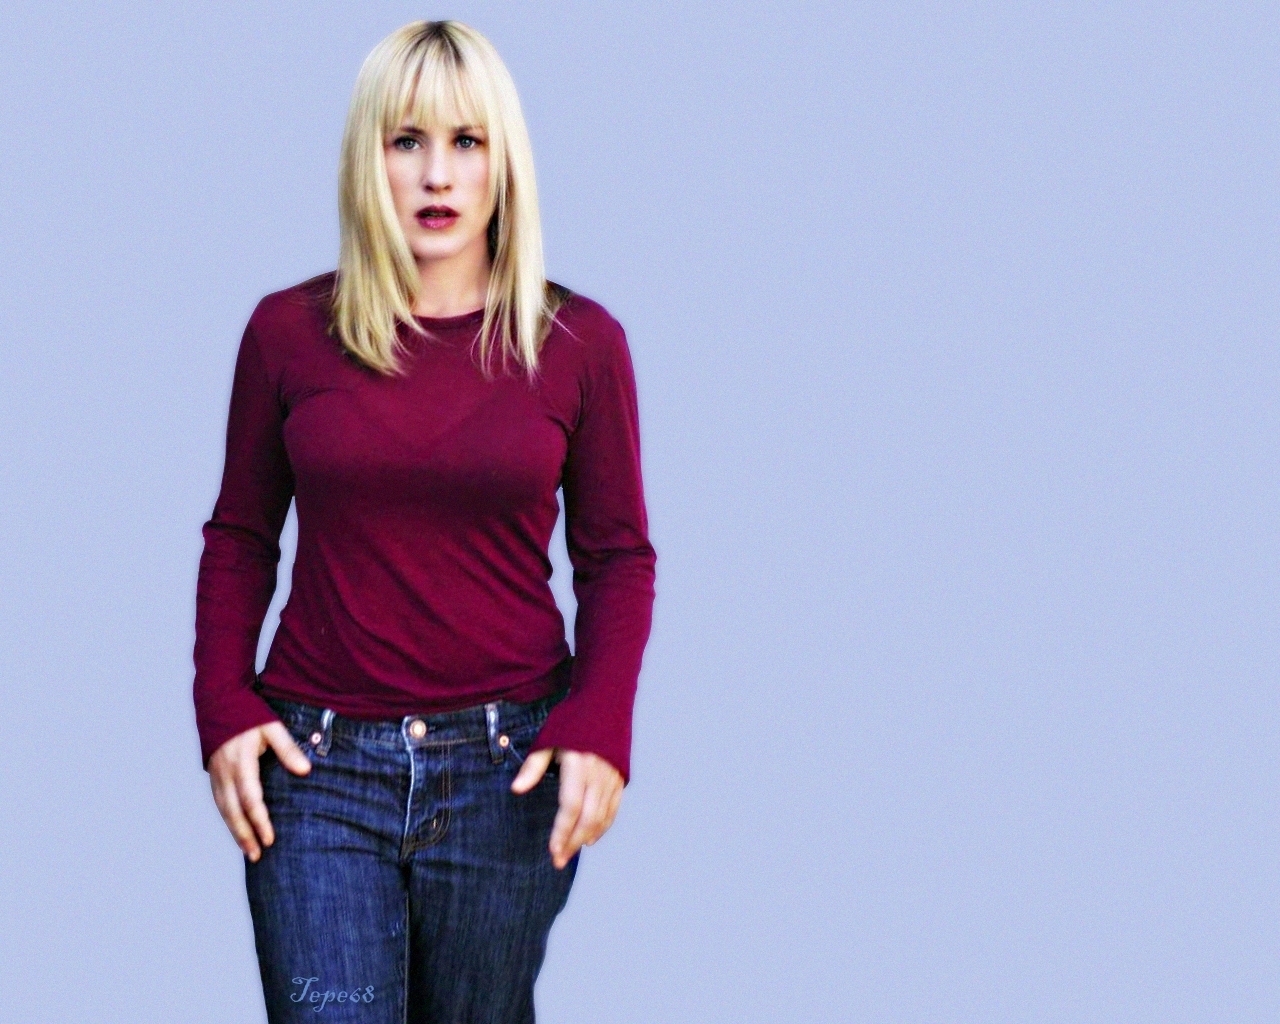 Actresses Image Patricia Arquette HD Wallpaper And Background